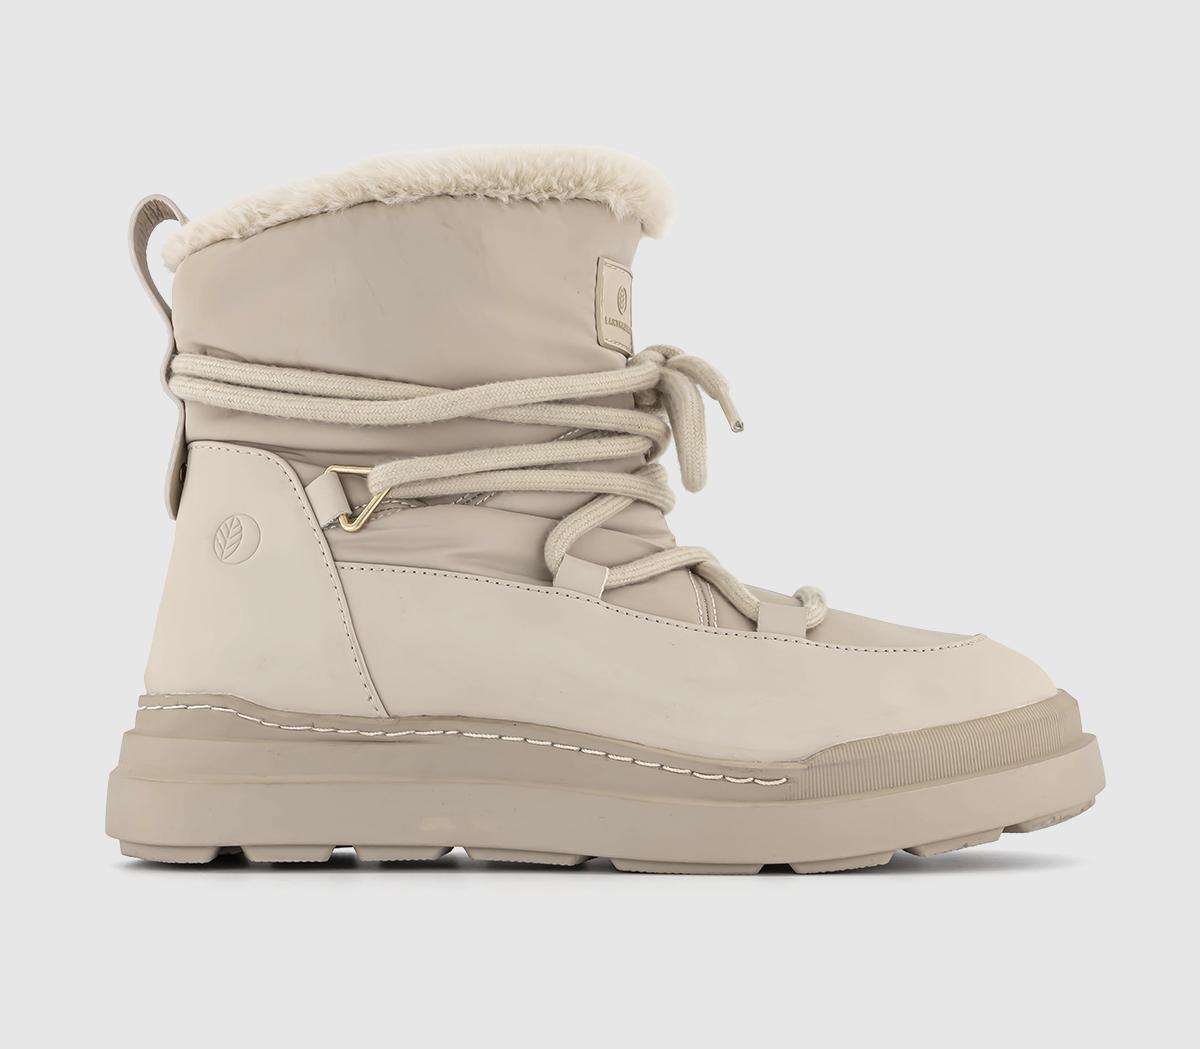 Earth Addict: Eira Warm Lined Snow Boots Beige